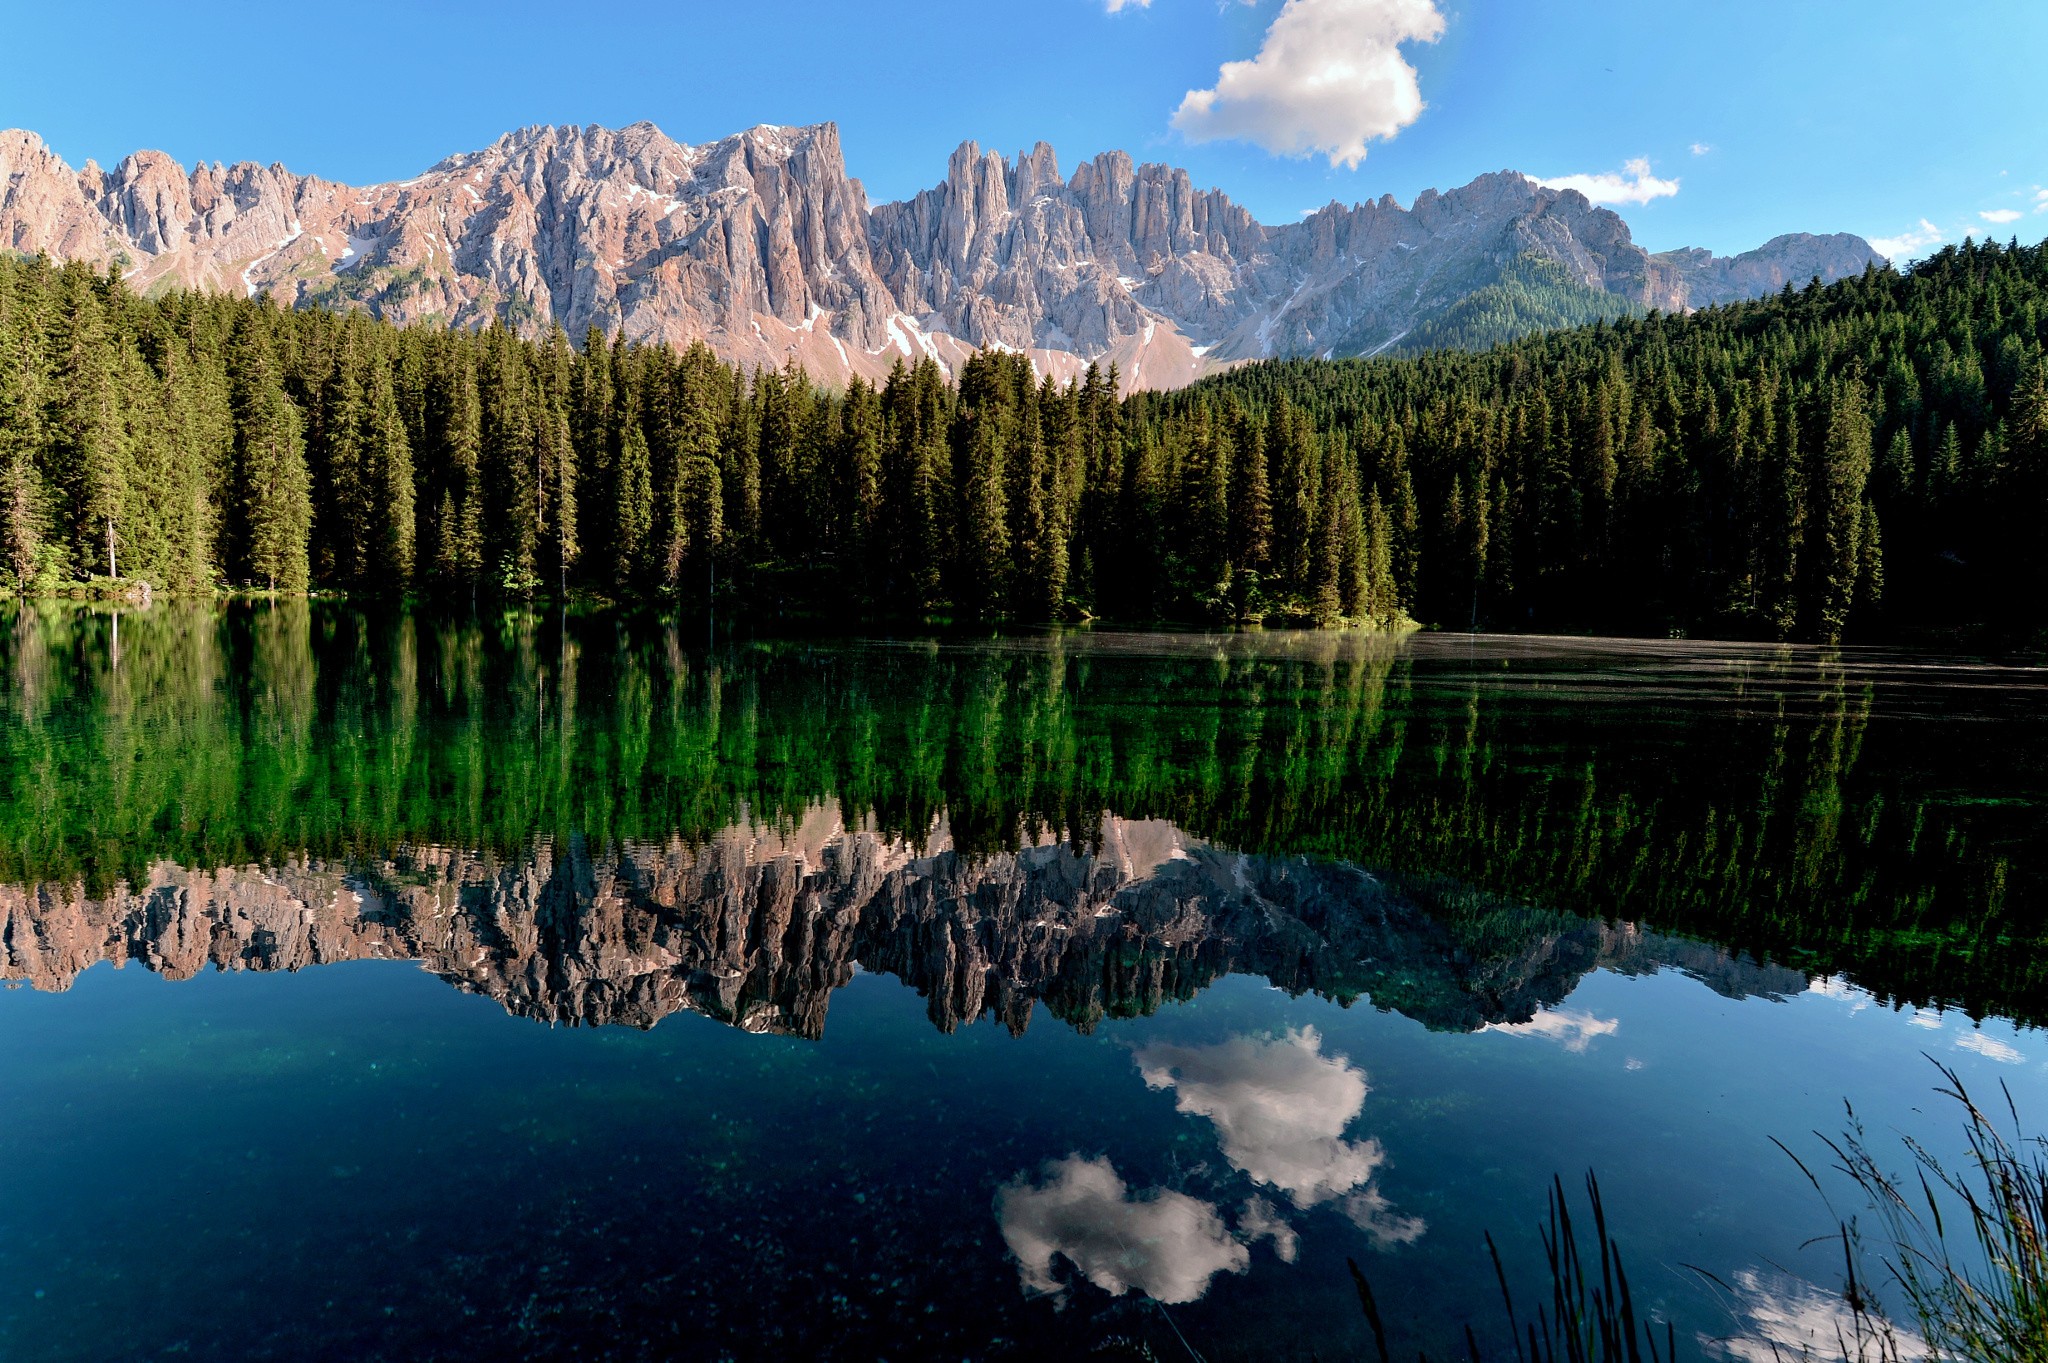 General 2048x1363 landscape Karersee Dolomites lake reflection mountains forest nature